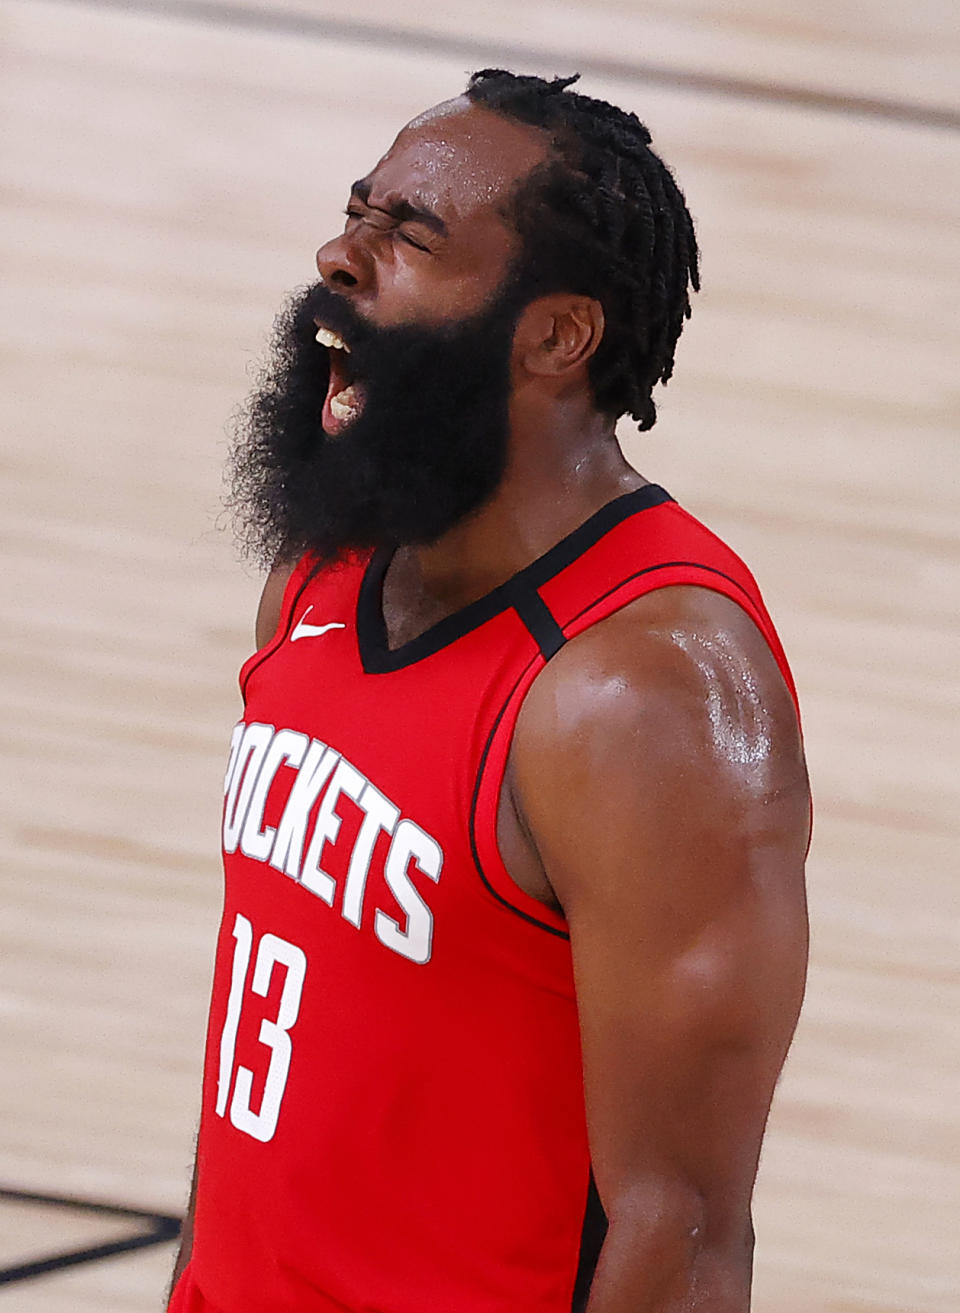 Houston Rockets' James Harden reacts after his three-point basket during the fourth quarter of Game 2 of an NBA basketball first-round playoff series against the Oklahoma City Thunder, Thursday, Aug. 20, 2020, in Lake Buena Vista, Fla. (Kevin C. Cox/Pool Photo via AP)